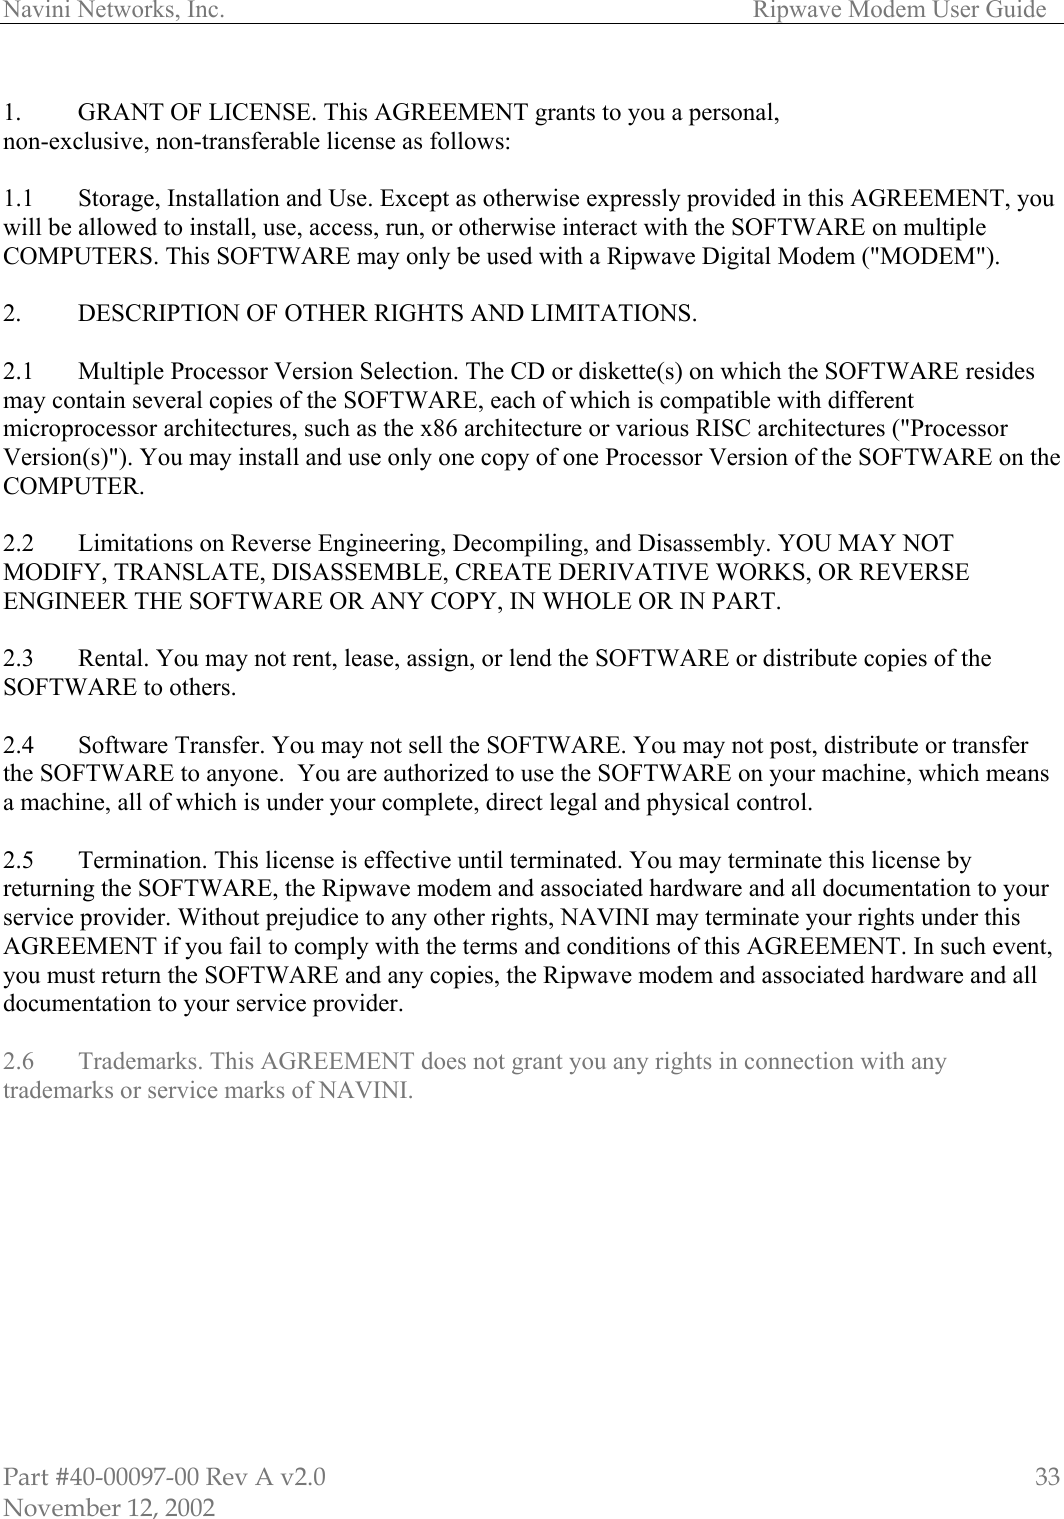 Navini Networks, Inc.        Ripwave Modem User Guide Part #40-00097-00 Rev A v2.0 November 12, 2002 33 1.  GRANT OF LICENSE. This AGREEMENT grants to you a personal,  non-exclusive, non-transferable license as follows:   1.1  Storage, Installation and Use. Except as otherwise expressly provided in this AGREEMENT, you will be allowed to install, use, access, run, or otherwise interact with the SOFTWARE on multiple COMPUTERS. This SOFTWARE may only be used with a Ripwave Digital Modem (&quot;MODEM&quot;).  2.   DESCRIPTION OF OTHER RIGHTS AND LIMITATIONS.   2.1   Multiple Processor Version Selection. The CD or diskette(s) on which the SOFTWARE resides may contain several copies of the SOFTWARE, each of which is compatible with different microprocessor architectures, such as the x86 architecture or various RISC architectures (&quot;Processor Version(s)&quot;). You may install and use only one copy of one Processor Version of the SOFTWARE on the COMPUTER.  2.2   Limitations on Reverse Engineering, Decompiling, and Disassembly. YOU MAY NOT MODIFY, TRANSLATE, DISASSEMBLE, CREATE DERIVATIVE WORKS, OR REVERSE ENGINEER THE SOFTWARE OR ANY COPY, IN WHOLE OR IN PART.  2.3   Rental. You may not rent, lease, assign, or lend the SOFTWARE or distribute copies of the SOFTWARE to others.  2.4   Software Transfer. You may not sell the SOFTWARE. You may not post, distribute or transfer the SOFTWARE to anyone.  You are authorized to use the SOFTWARE on your machine, which means a machine, all of which is under your complete, direct legal and physical control.  2.5   Termination. This license is effective until terminated. You may terminate this license by returning the SOFTWARE, the Ripwave modem and associated hardware and all documentation to your service provider. Without prejudice to any other rights, NAVINI may terminate your rights under this AGREEMENT if you fail to comply with the terms and conditions of this AGREEMENT. In such event, you must return the SOFTWARE and any copies, the Ripwave modem and associated hardware and all documentation to your service provider.  2.6  Trademarks. This AGREEMENT does not grant you any rights in connection with any trademarks or service marks of NAVINI.  